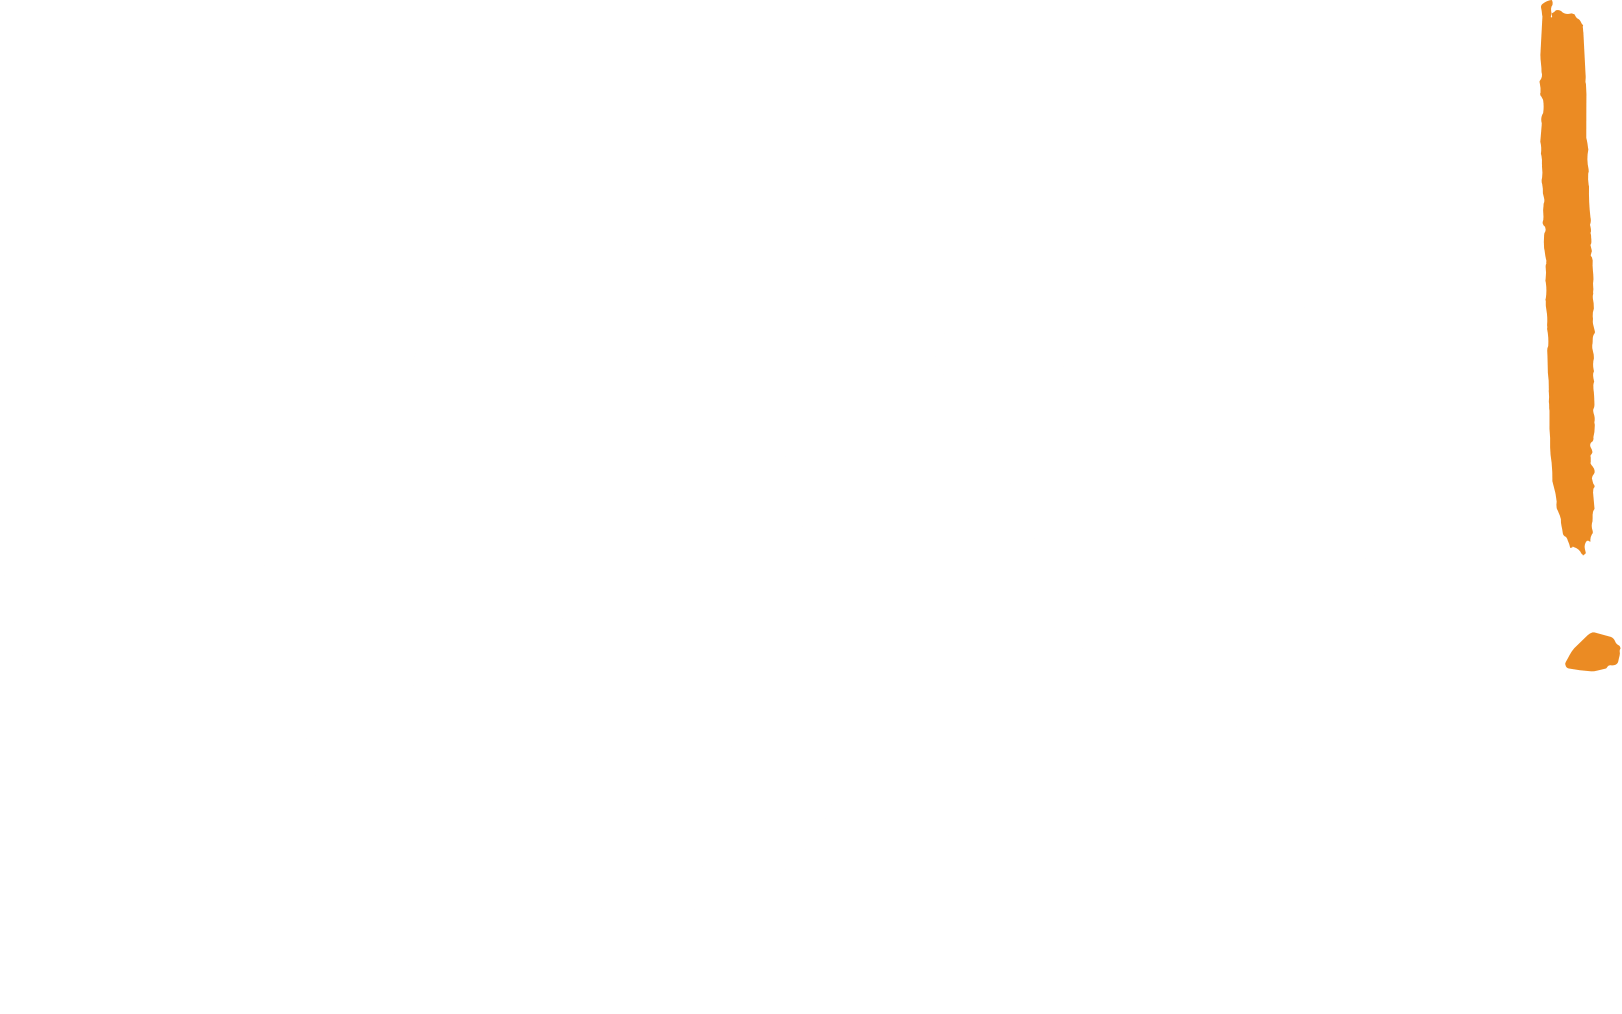 Goal_Graphic-01-2x.png